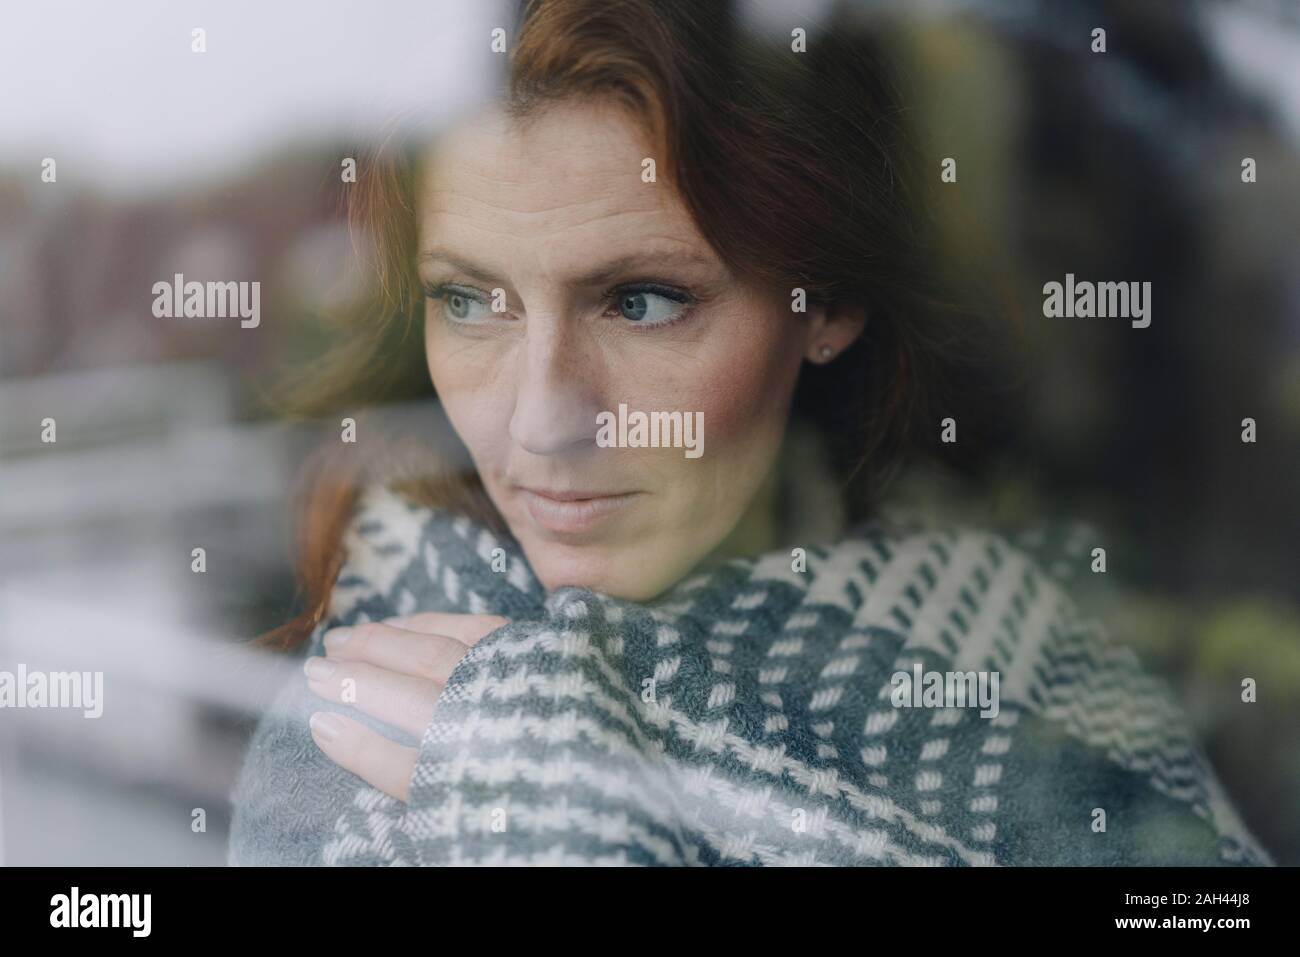 Woman looking out of window, wrapped in blanket Stock Photo